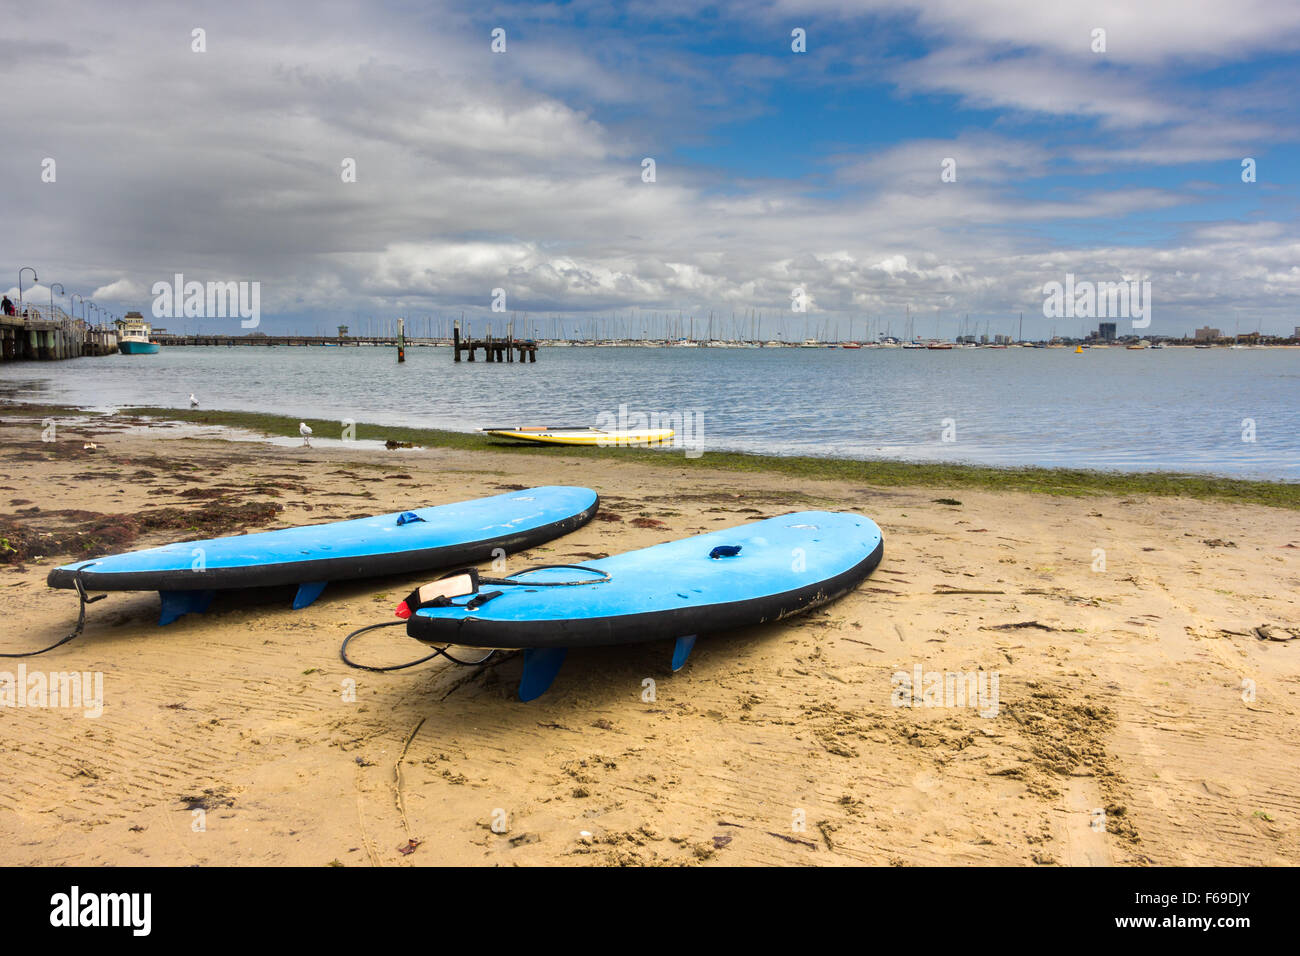 Three surfboards resting on a quiet beach in St Kilda, Melbourne. Stock Photo